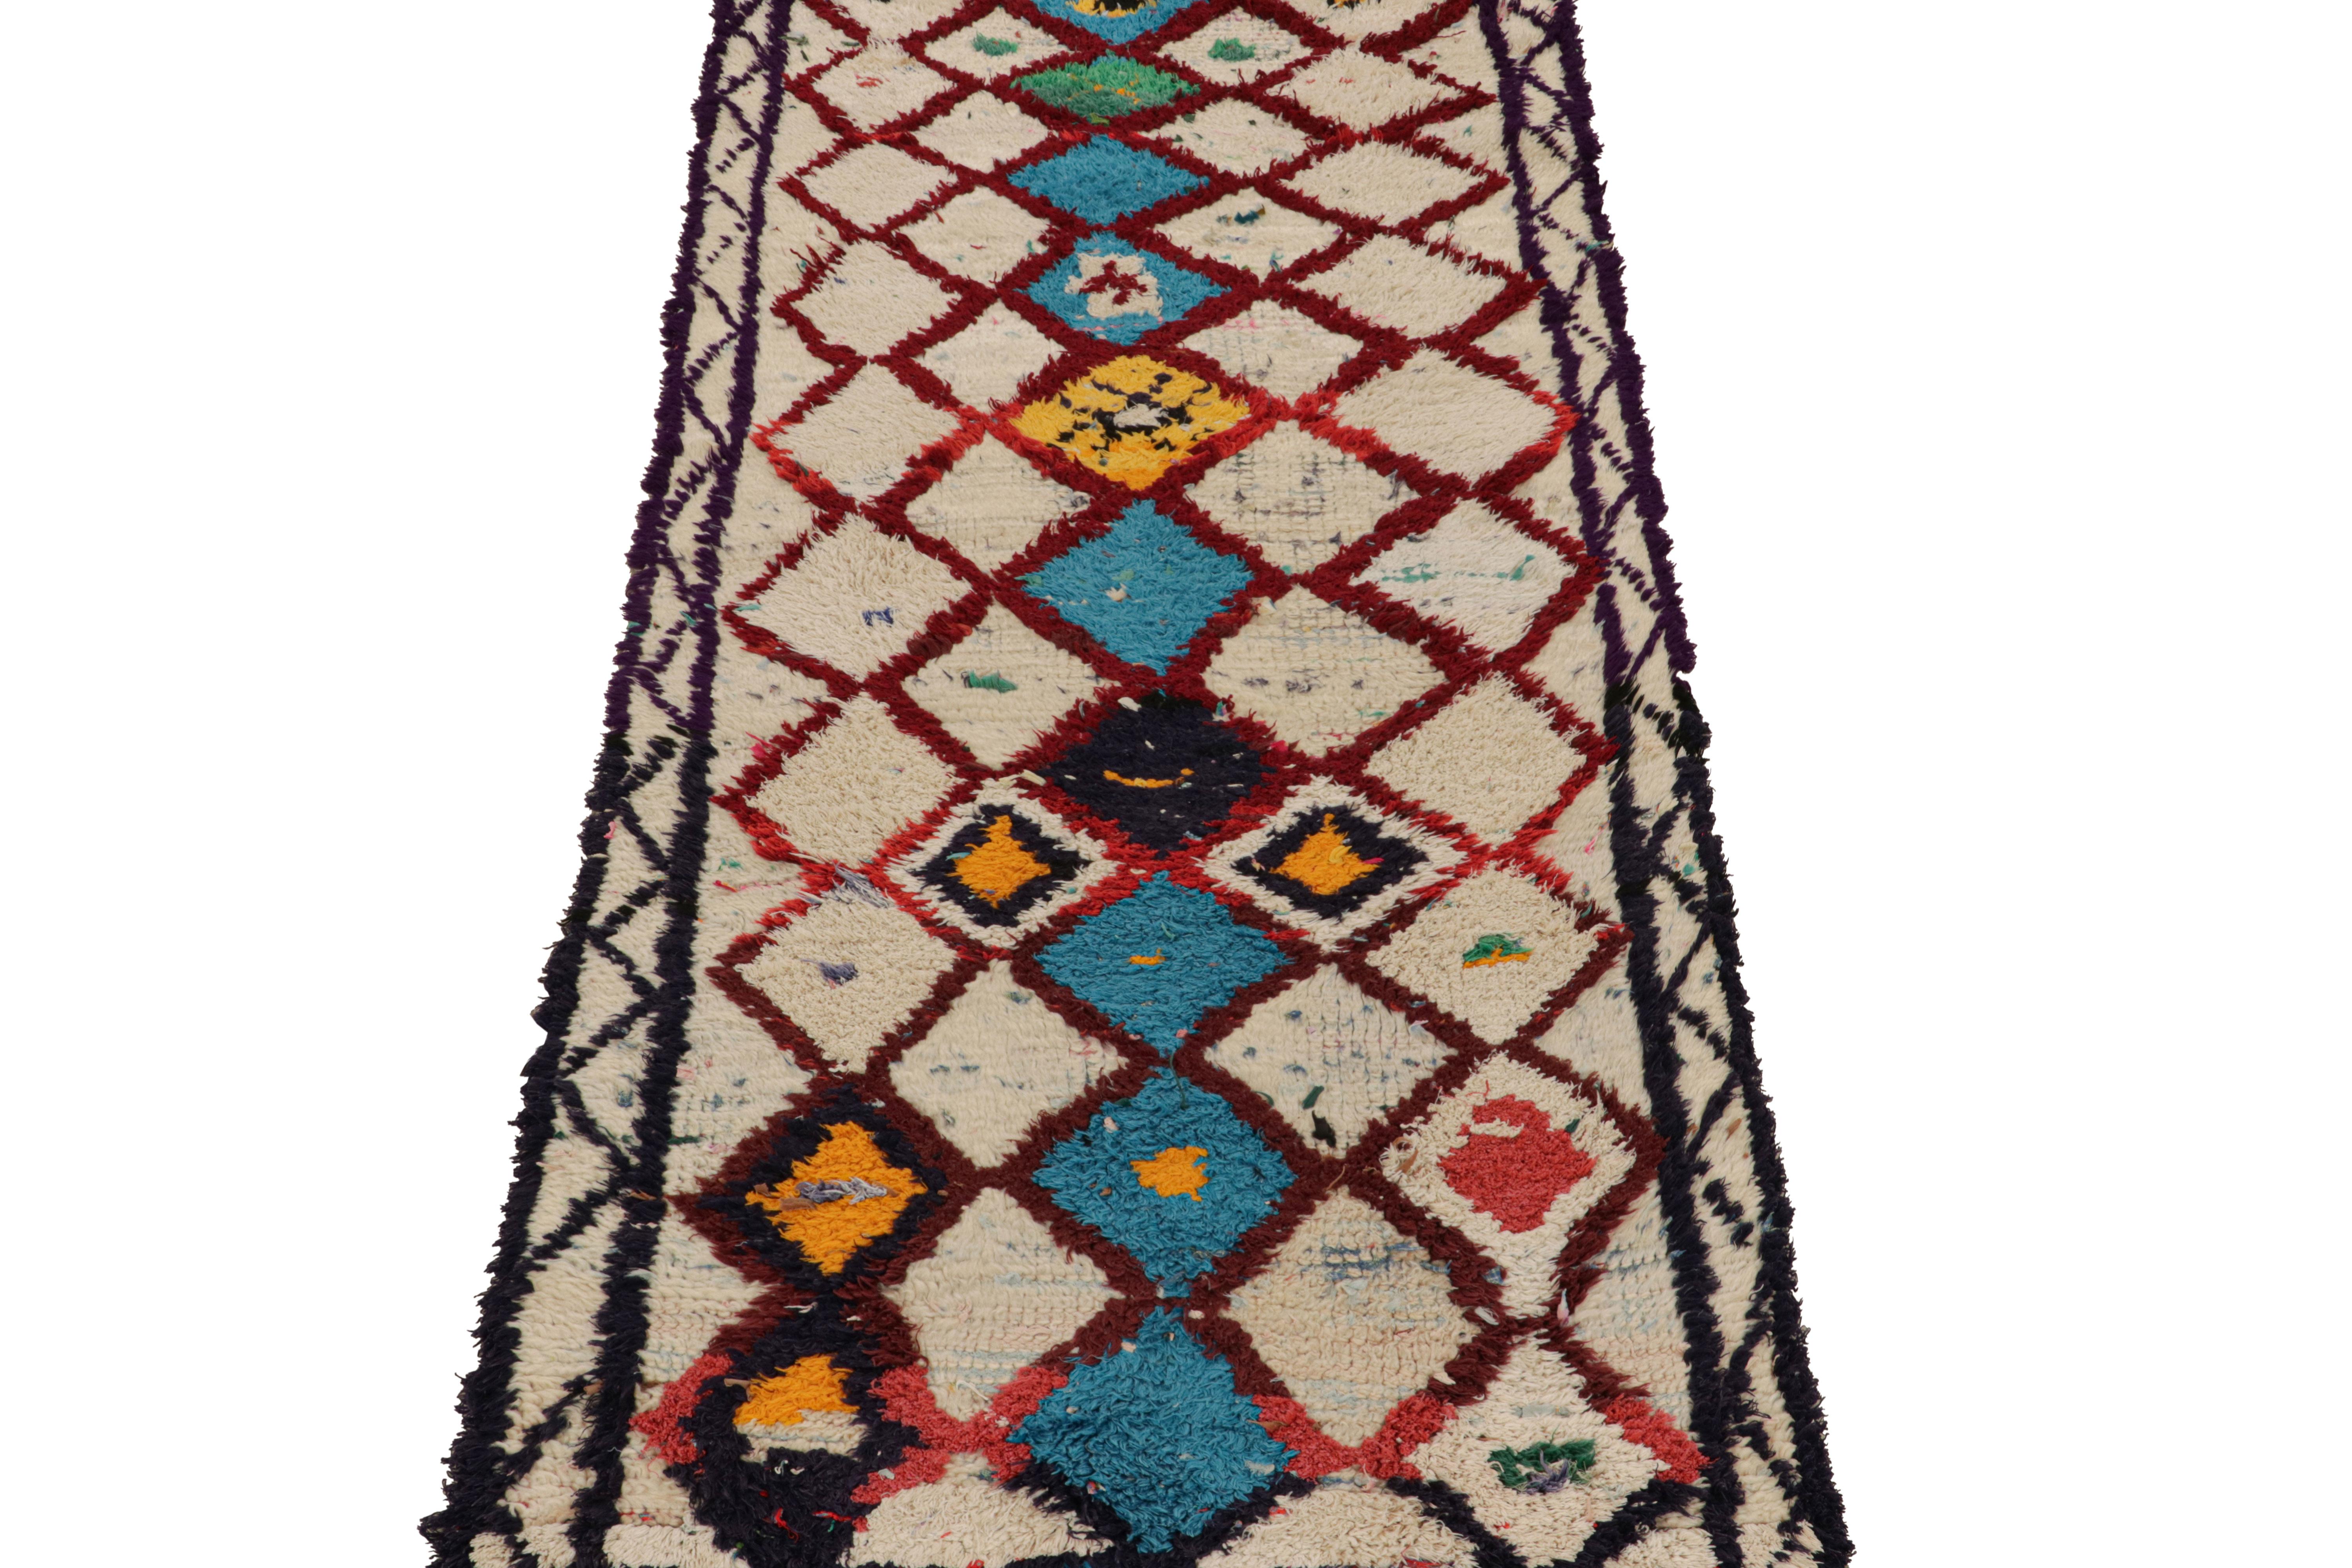 Hand-Knotted Vintage Moroccan Runner Rug with Colorful Diamond Patterns, from Rug & Kilim  For Sale